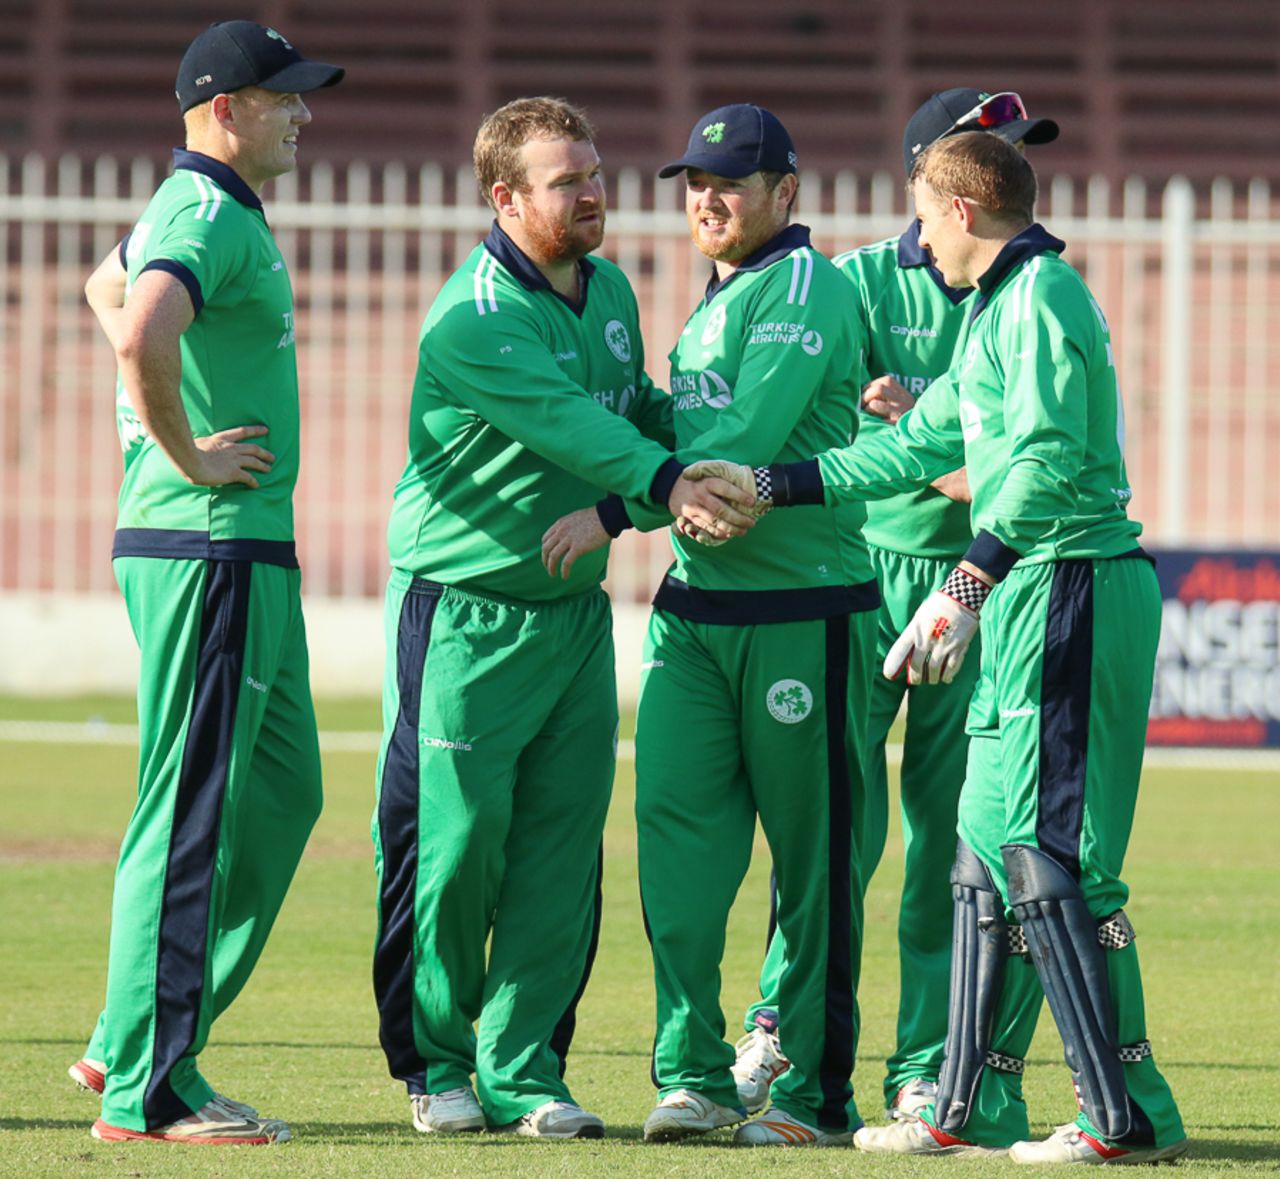 Paul Stirling gets a handshake from Niall O'Brien after claiming a wicket, Afghanistan v Ireland, 3rd ODI, Sharjah, December 10, 2017